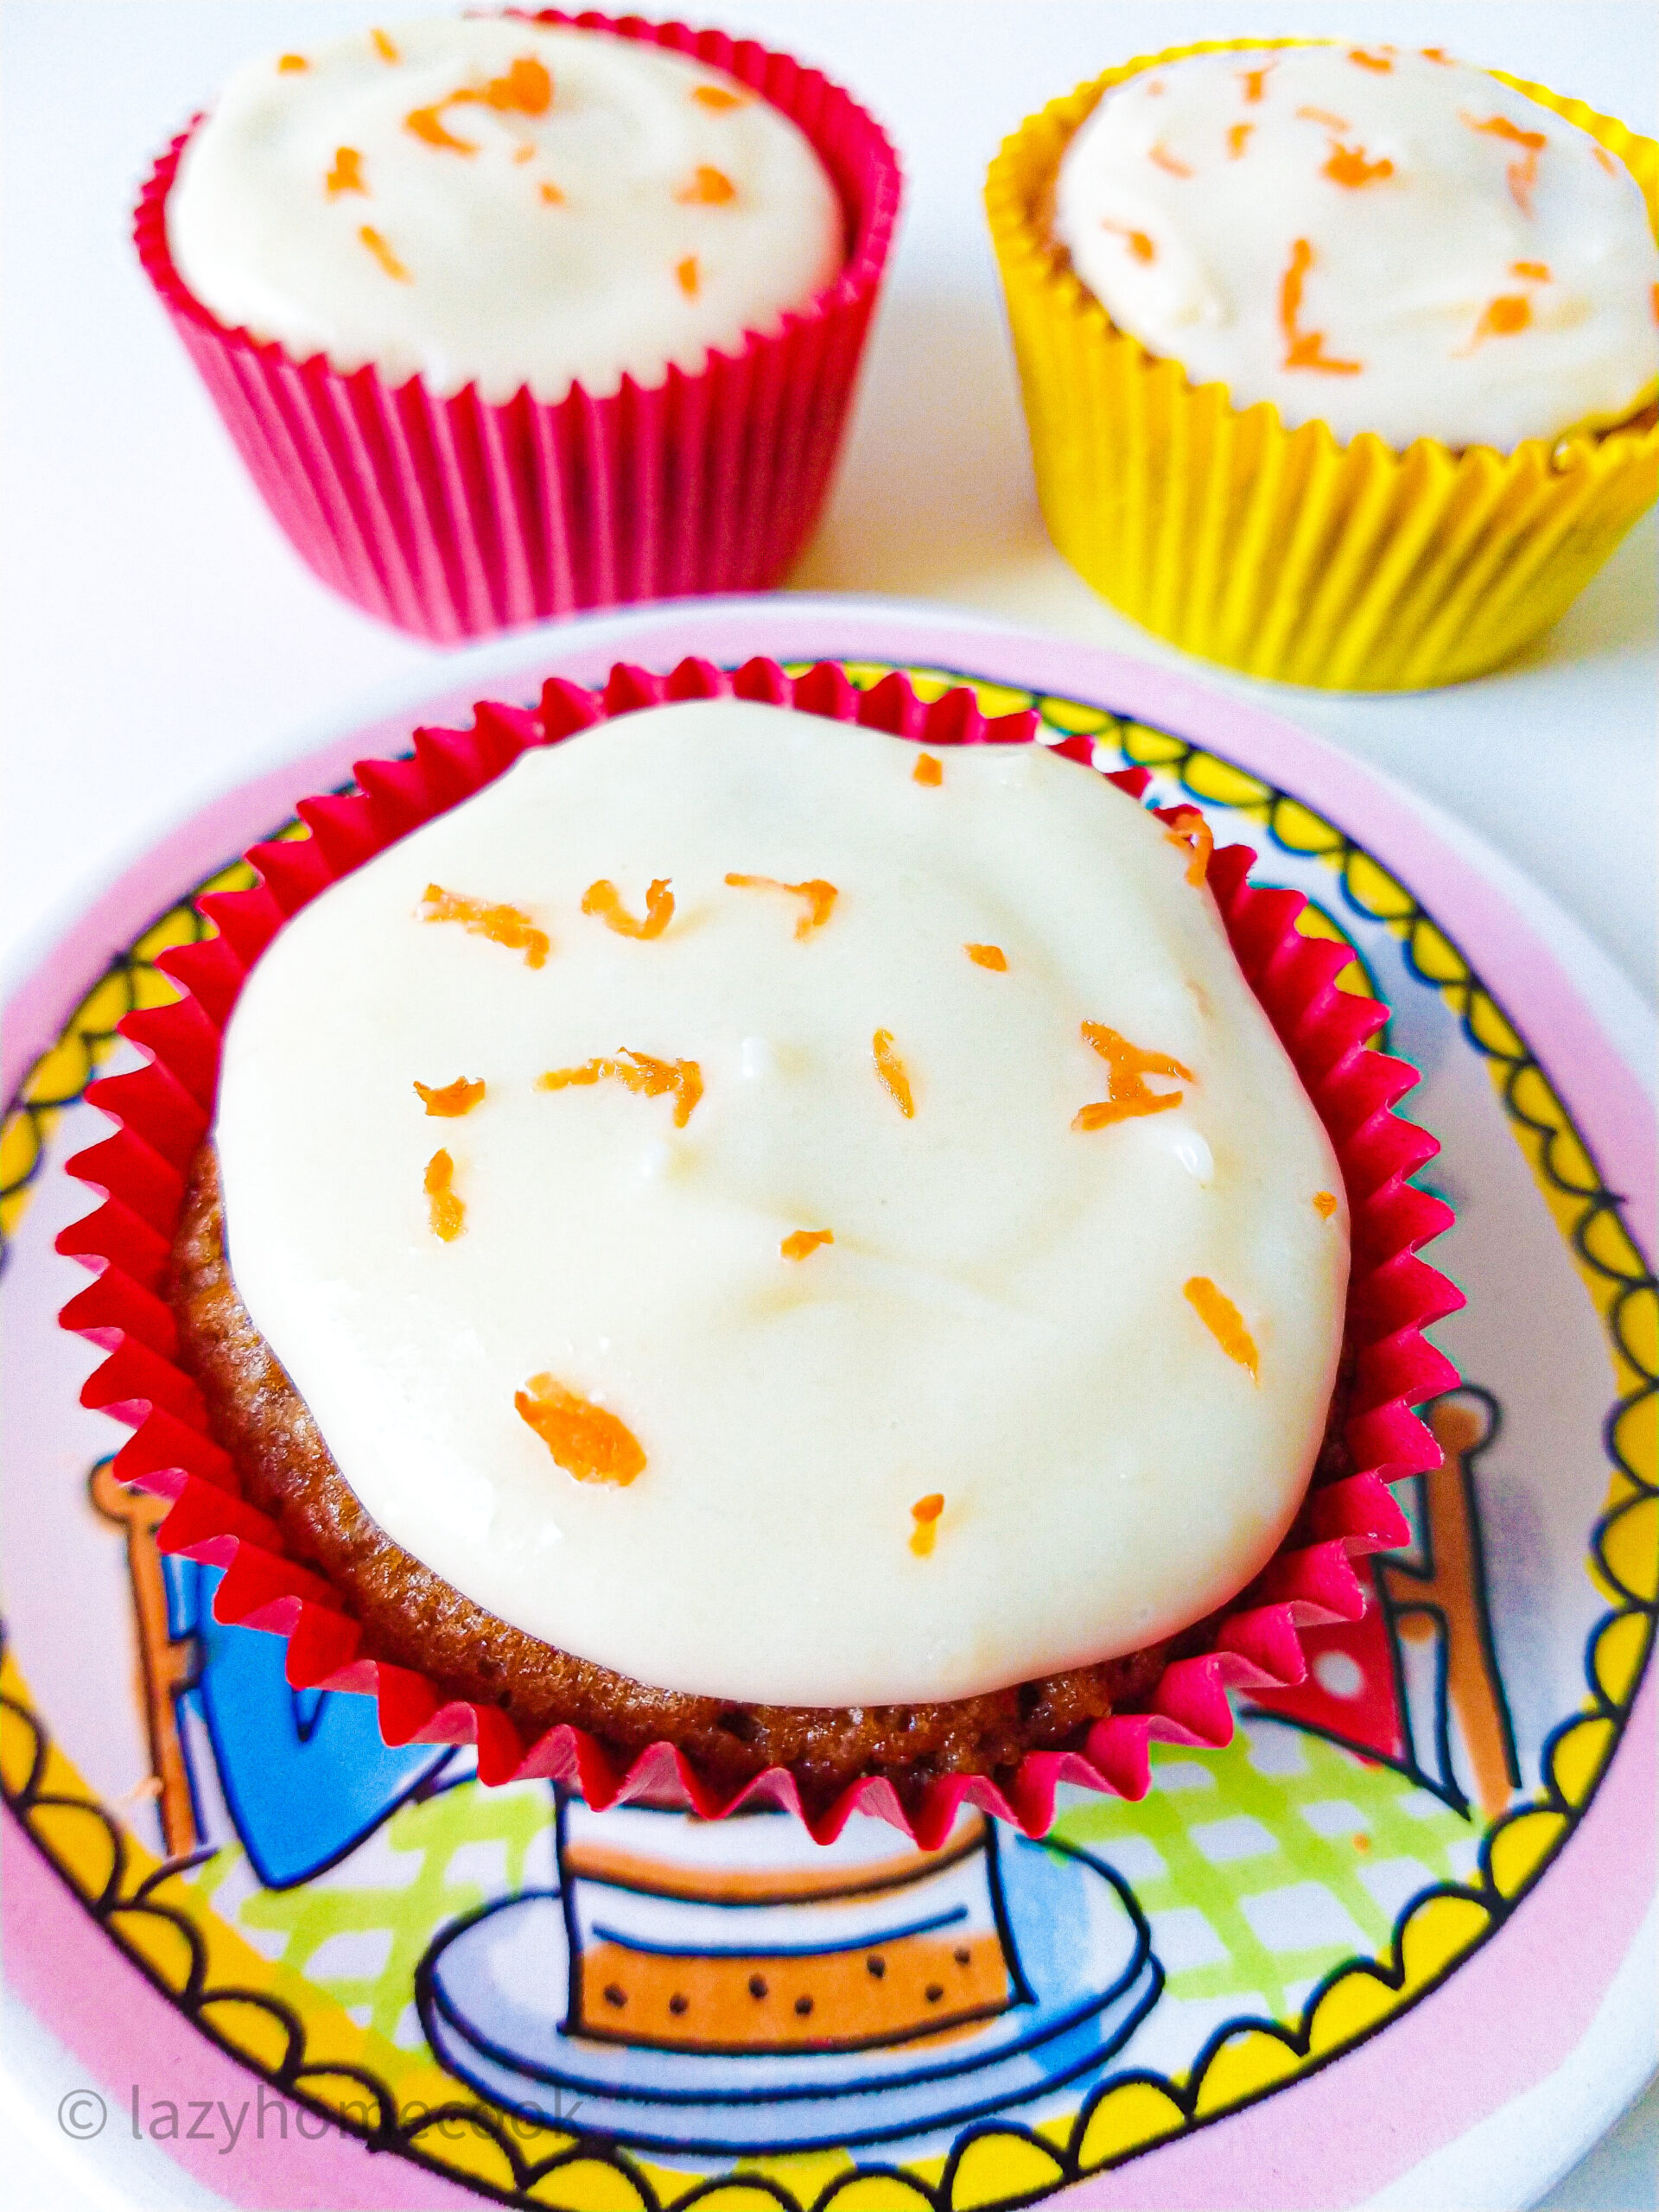 Carrot cupcakes recipe with cream cheese frosting